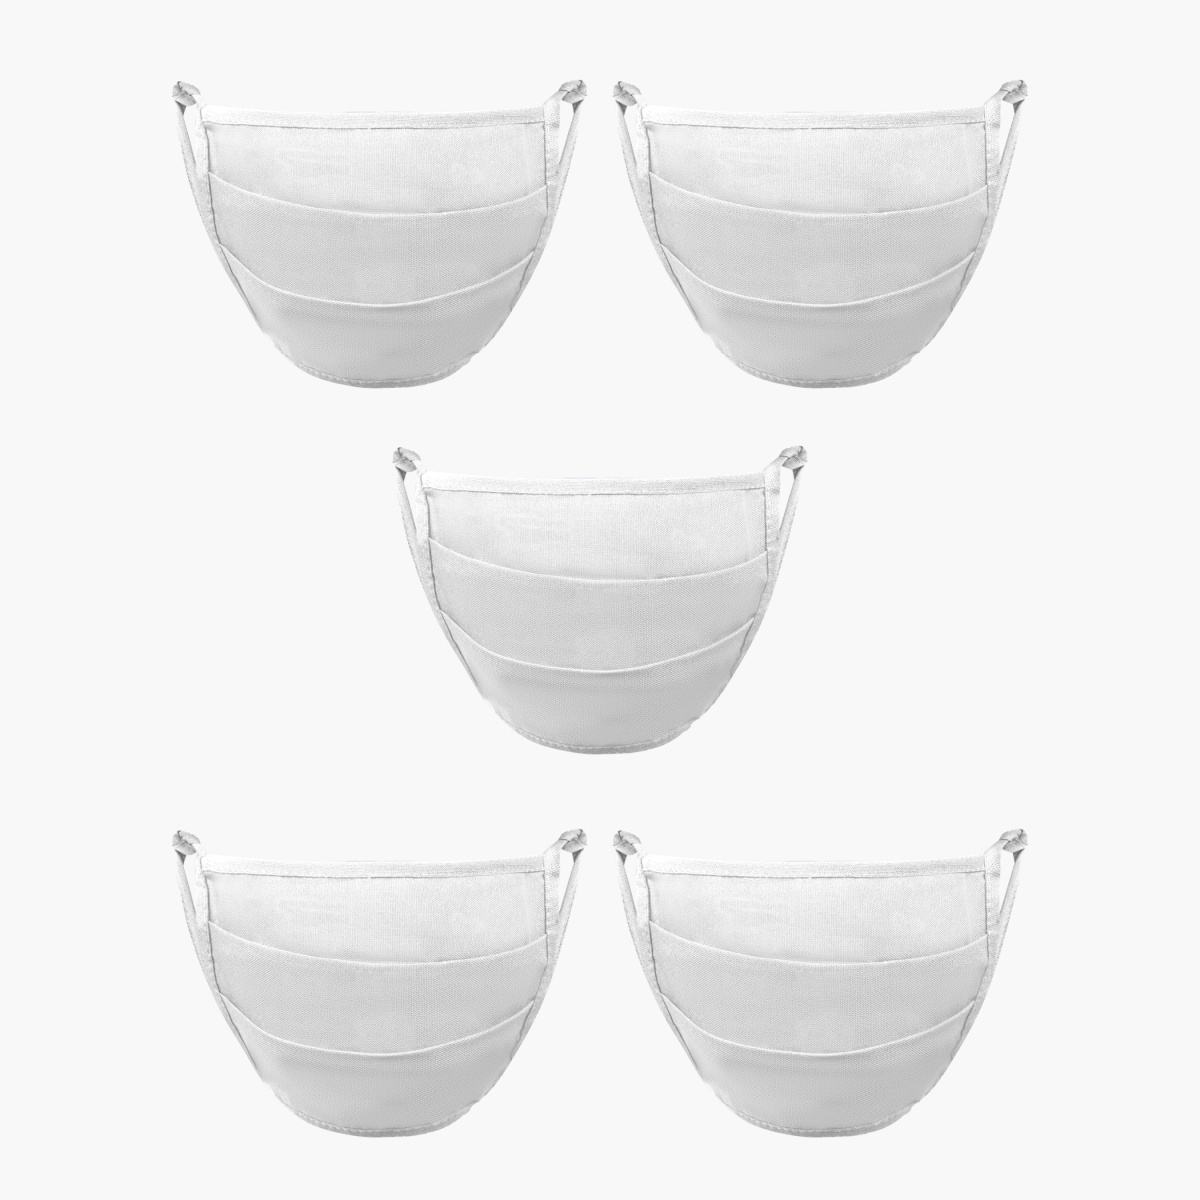 

W Women Solid Reusable Flat-Folded Face Mask - Pack of 5, White